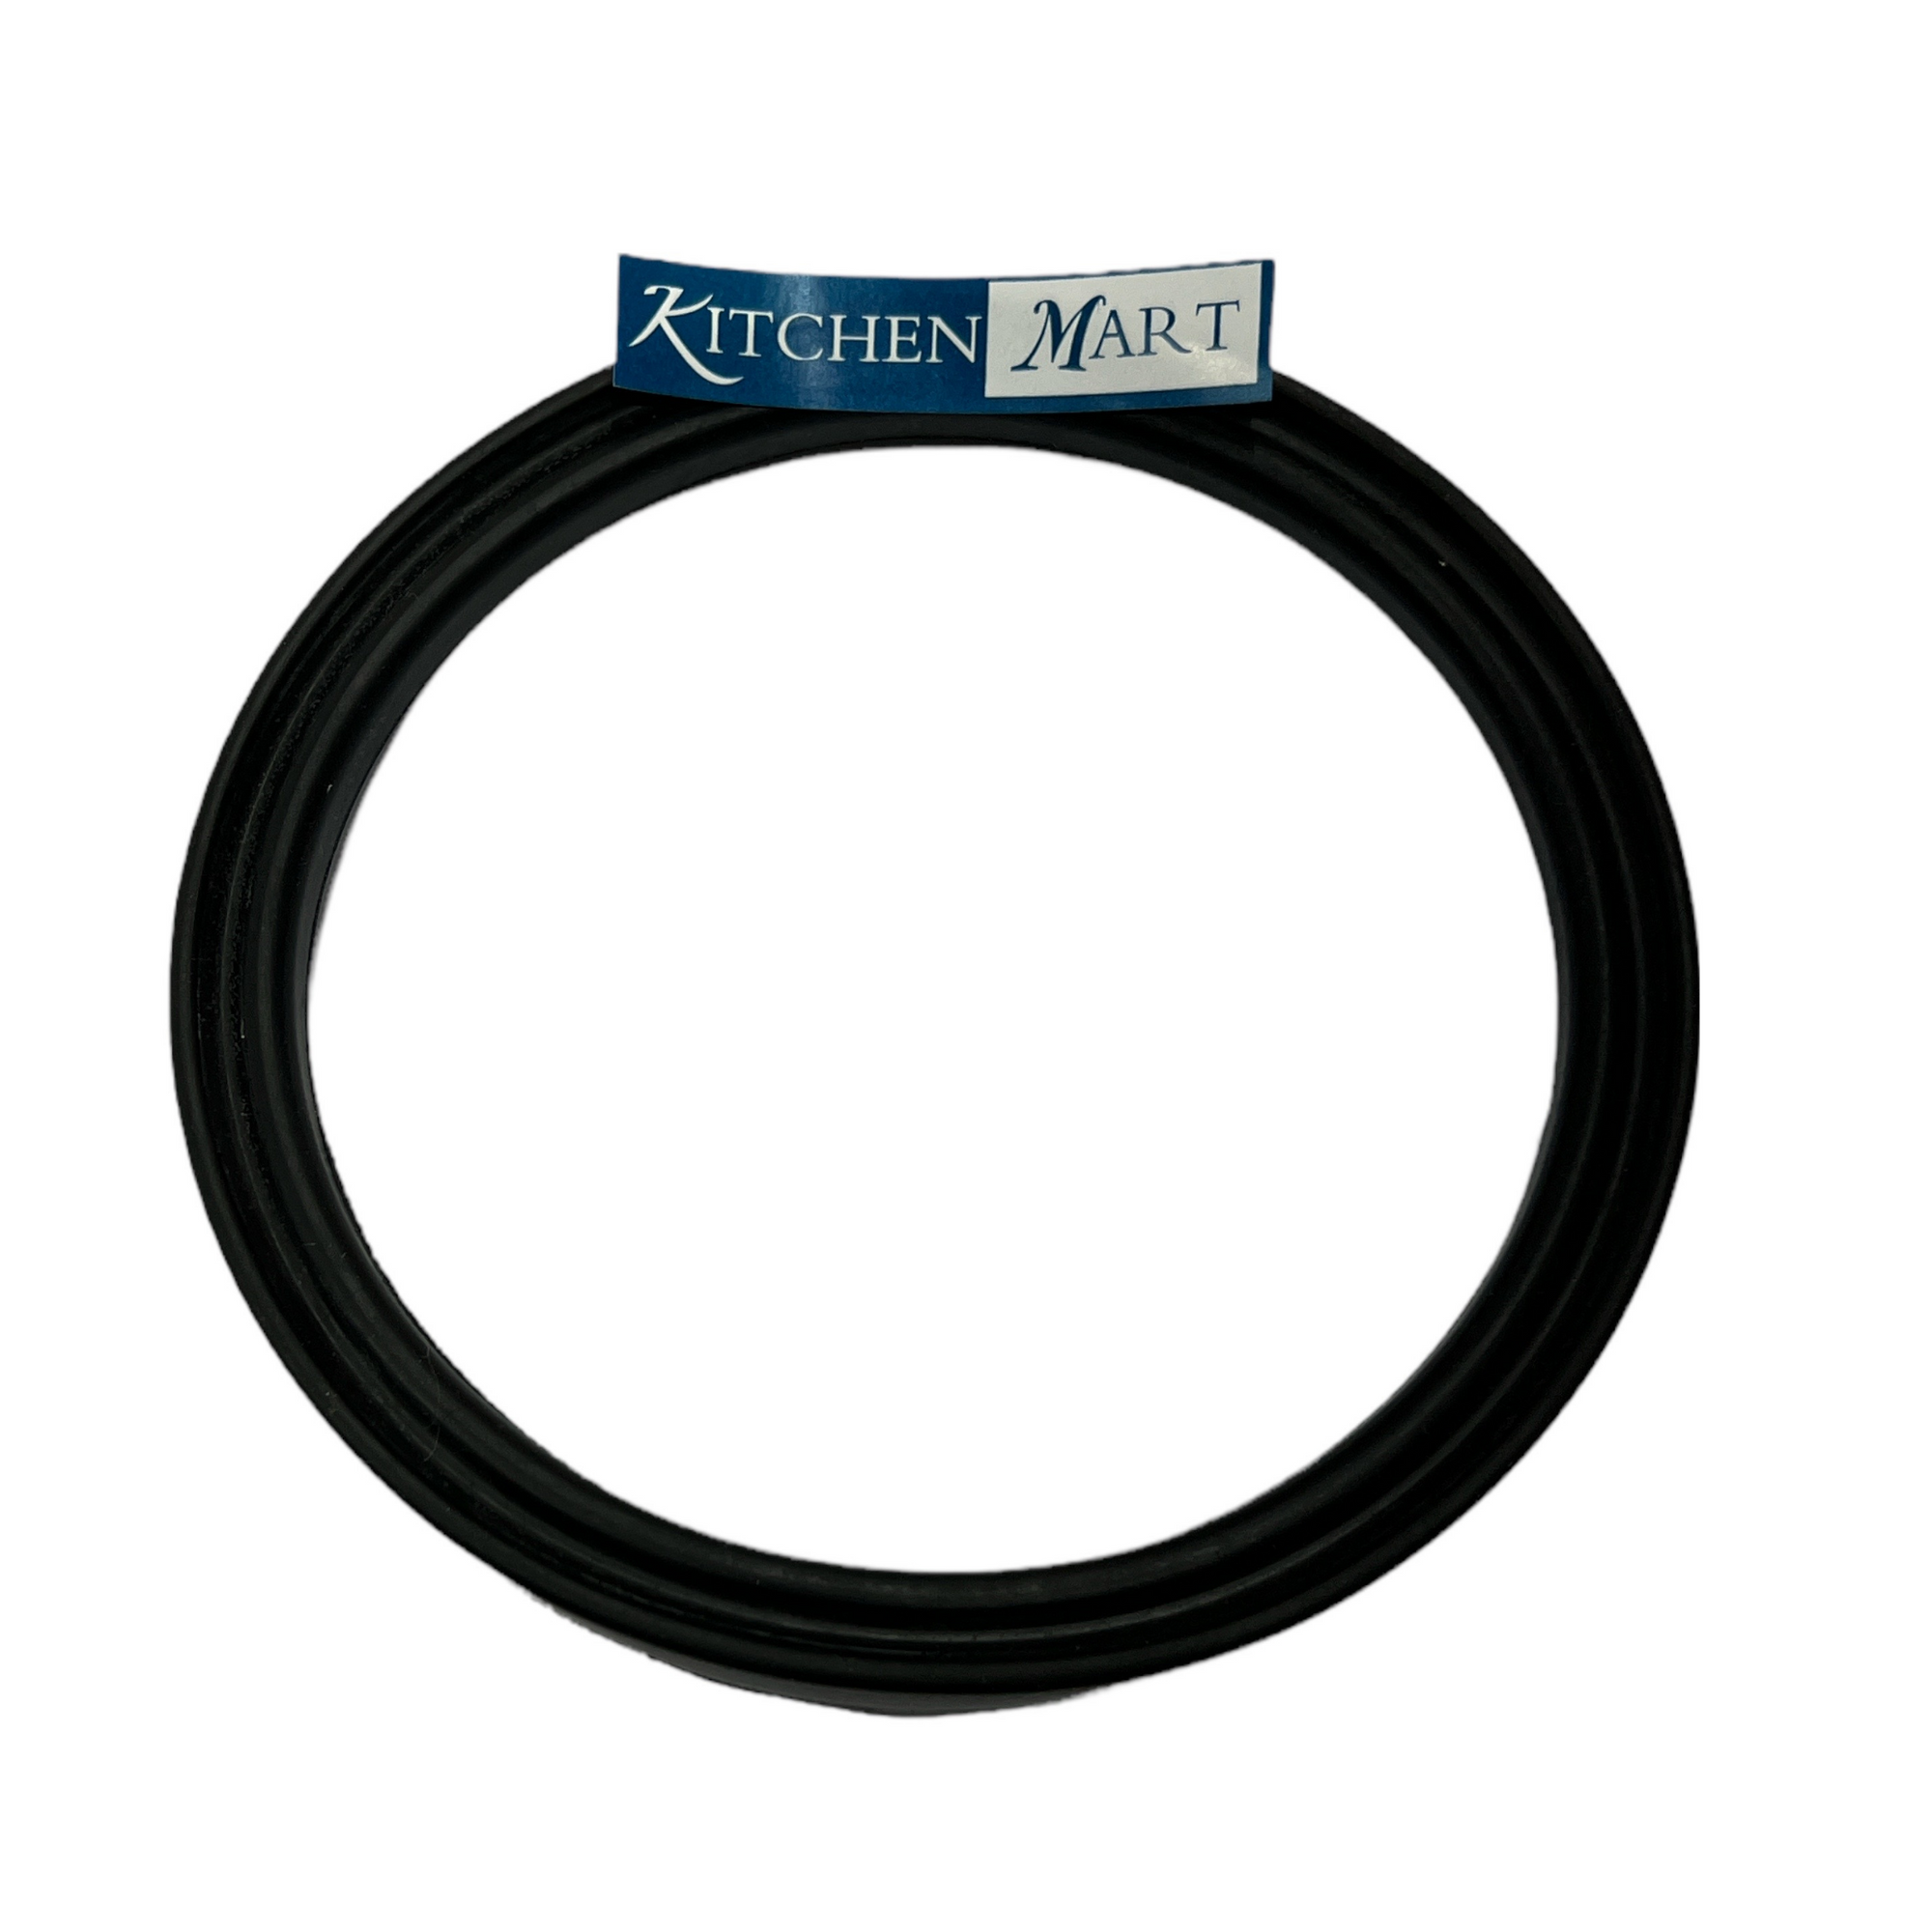 Replacement Gasket compatible with Bosch Mixer grinder